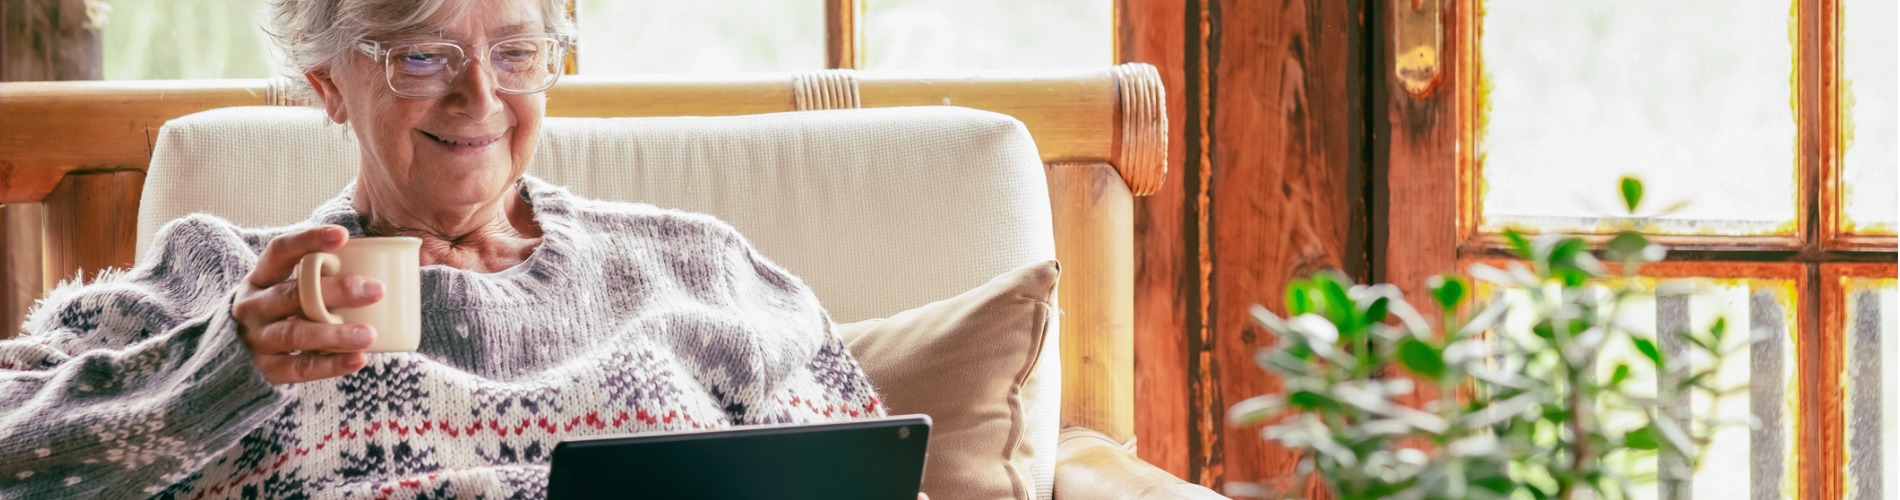 old-senior-woman-sitting-at-home-on-armchair-using-digital-tablet-wearing-a-warm-sweater-and.1900x500jpg